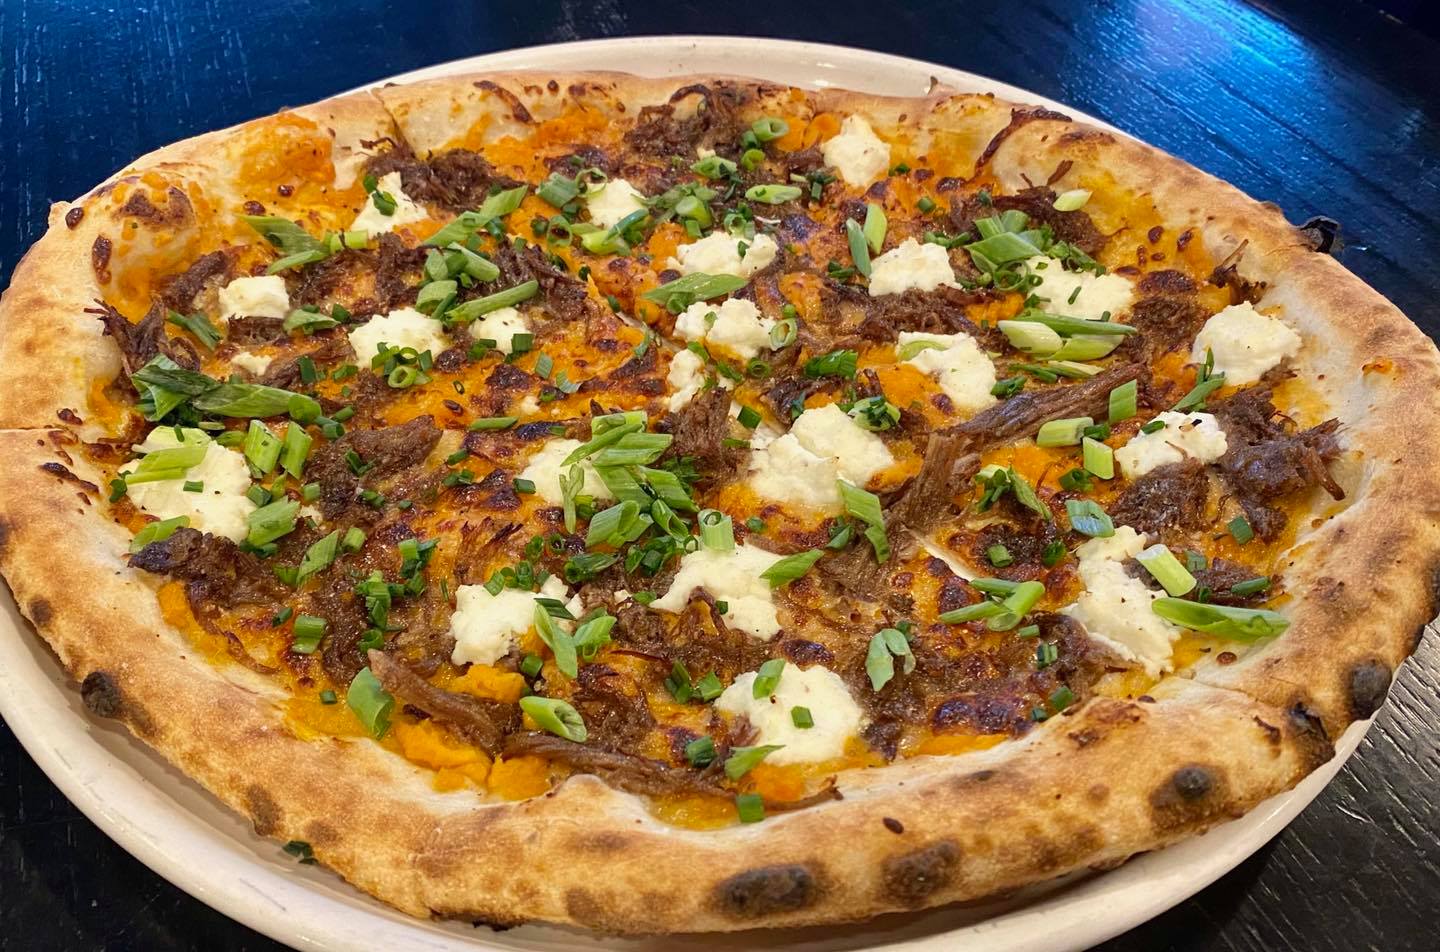 In The Mood For Pizza? Check Out QuadCities.com's List Of Local Pizza Places!